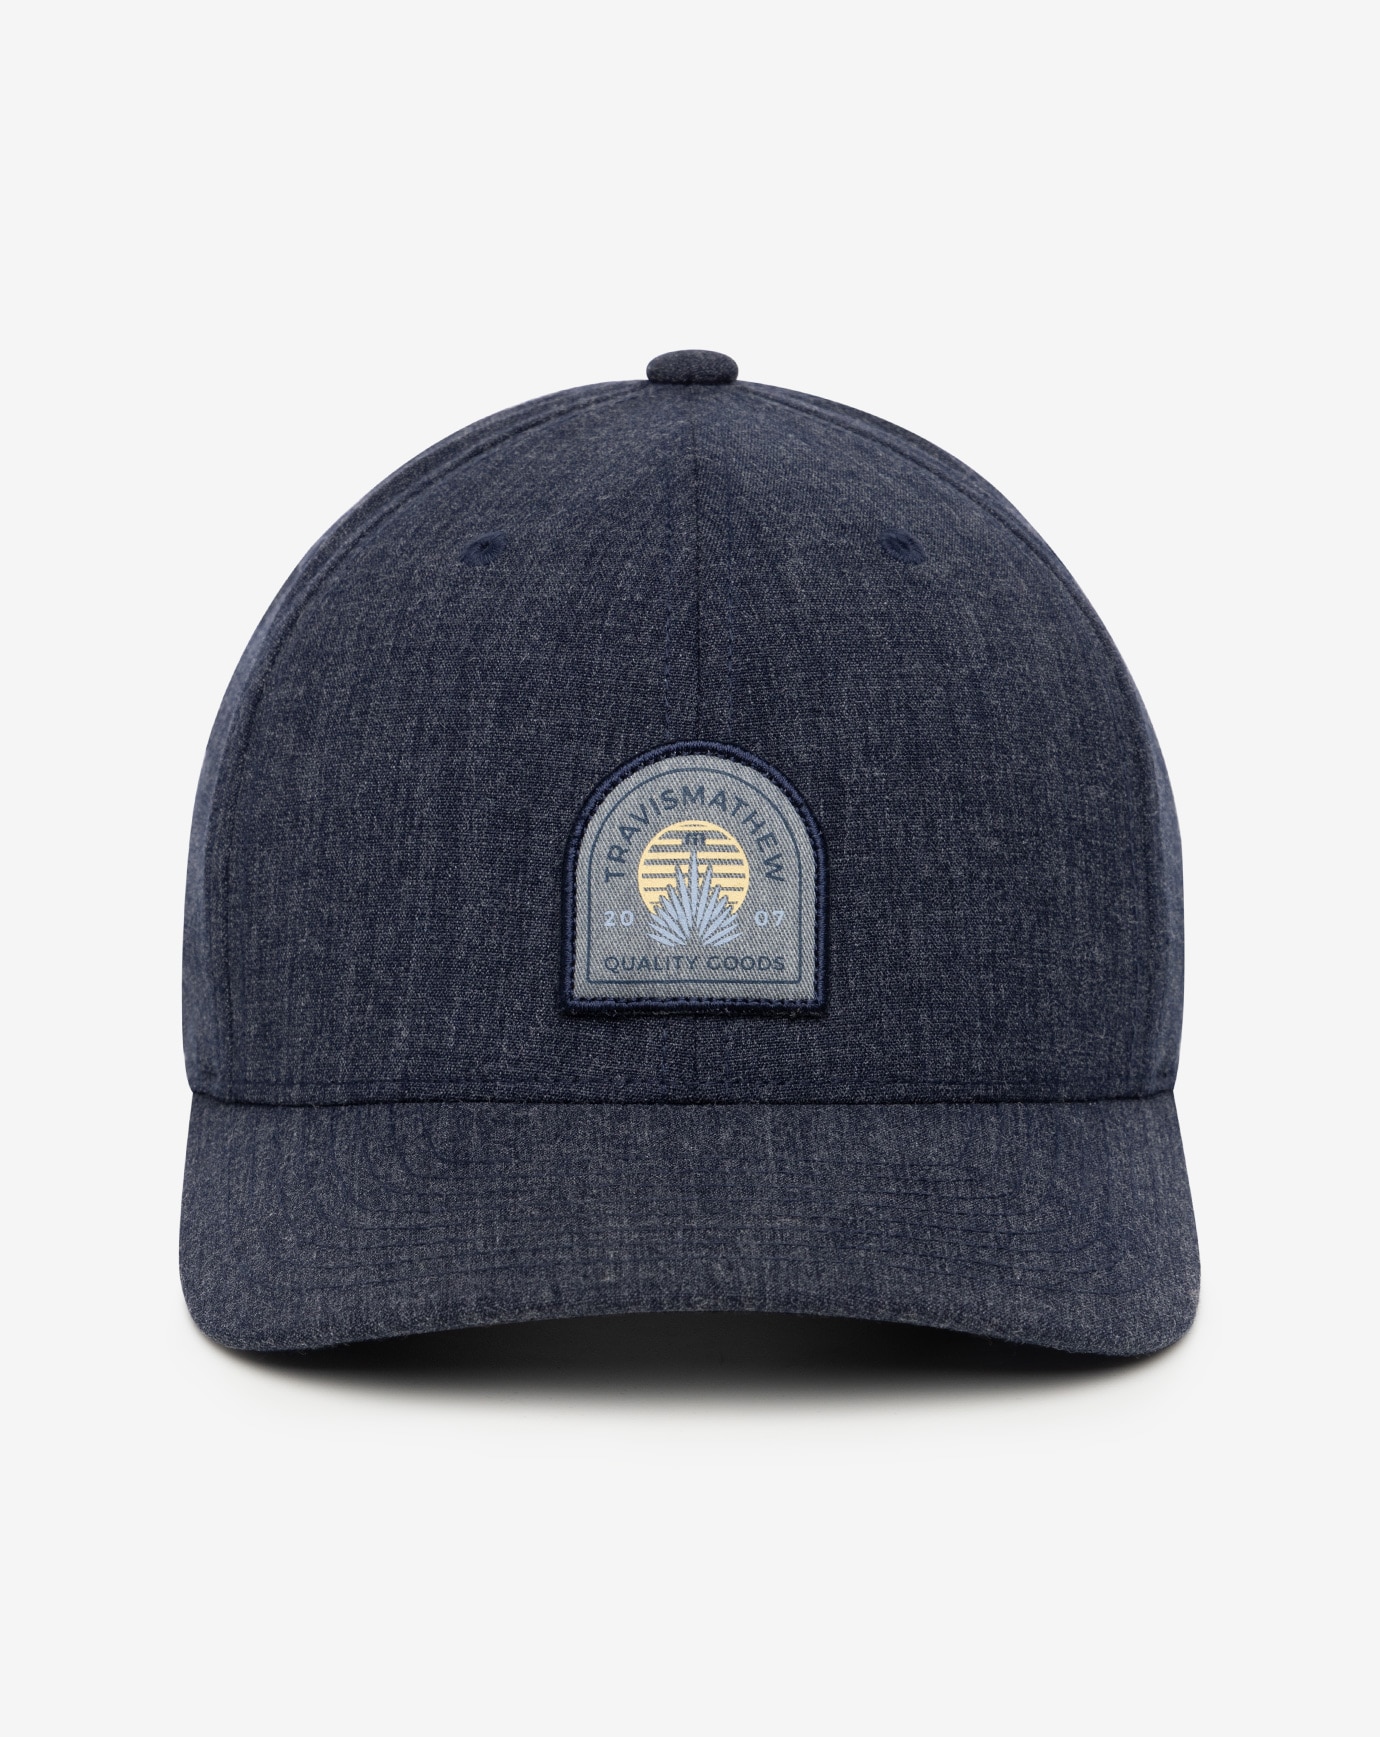 Related Product - FESTIVAL SNAPBACK HAT